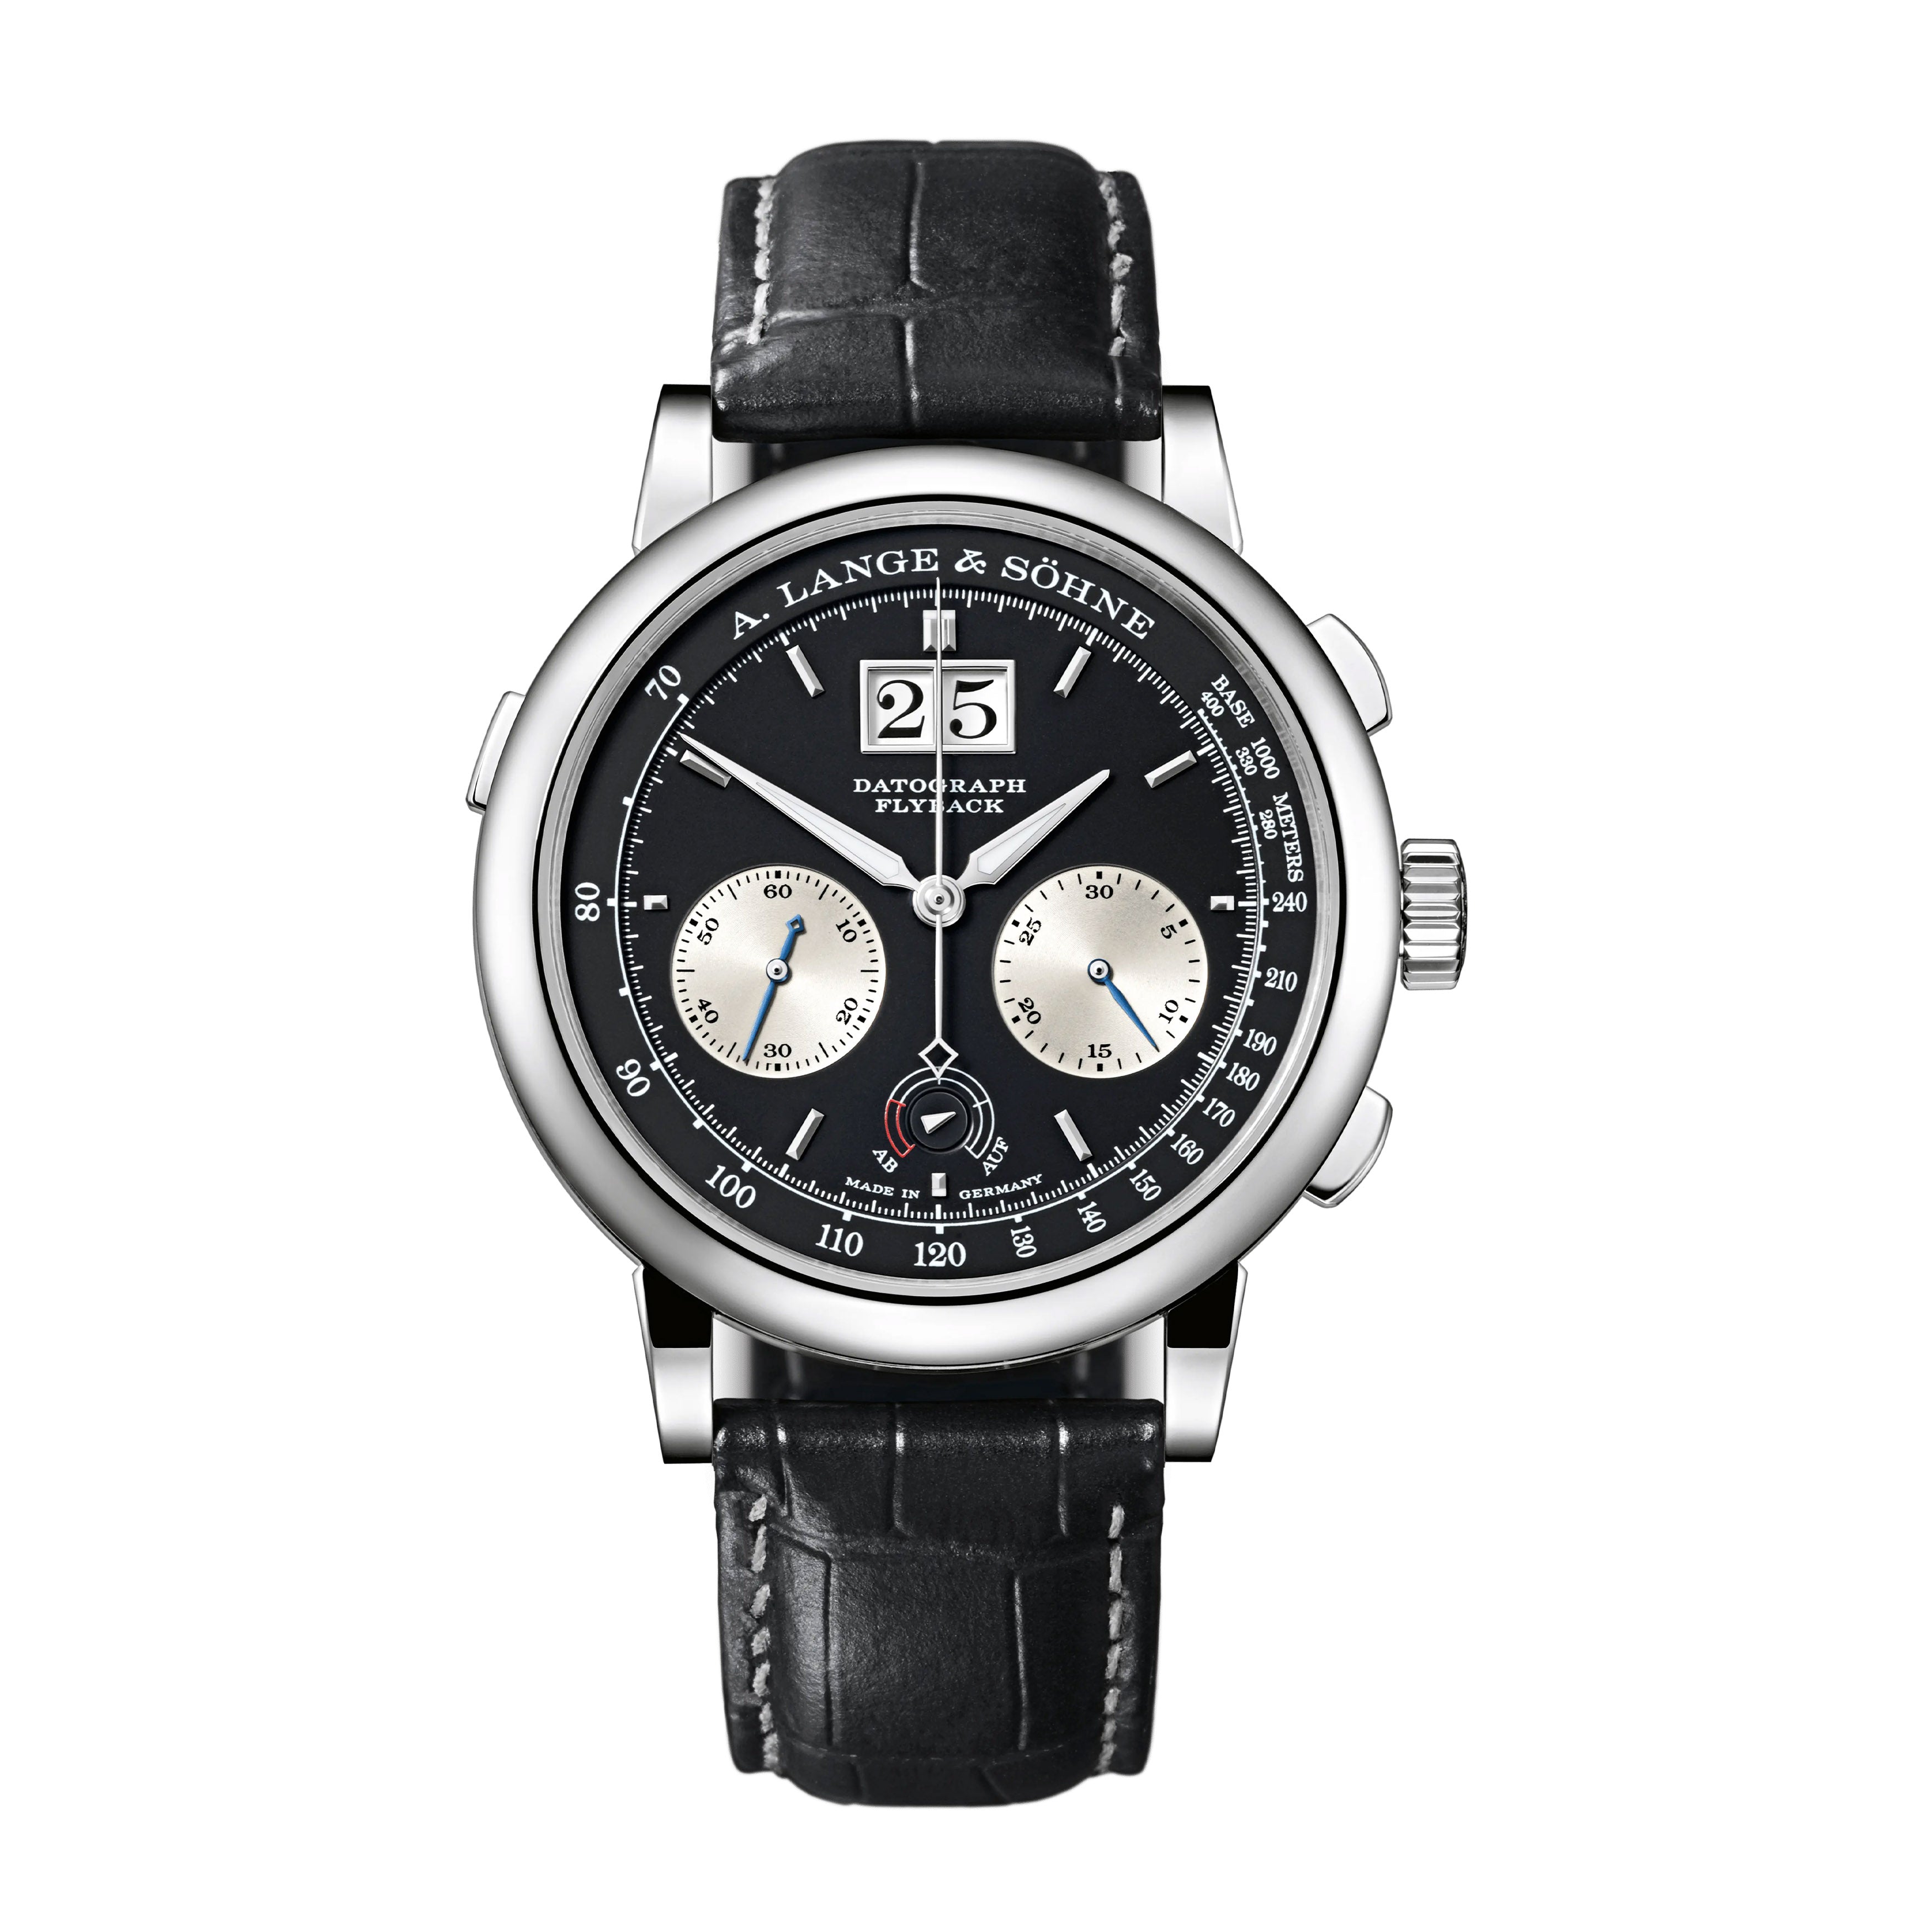 A.Lange & Sohne Datograph Up/Down Watch, 41mm Black Dial, 405.035